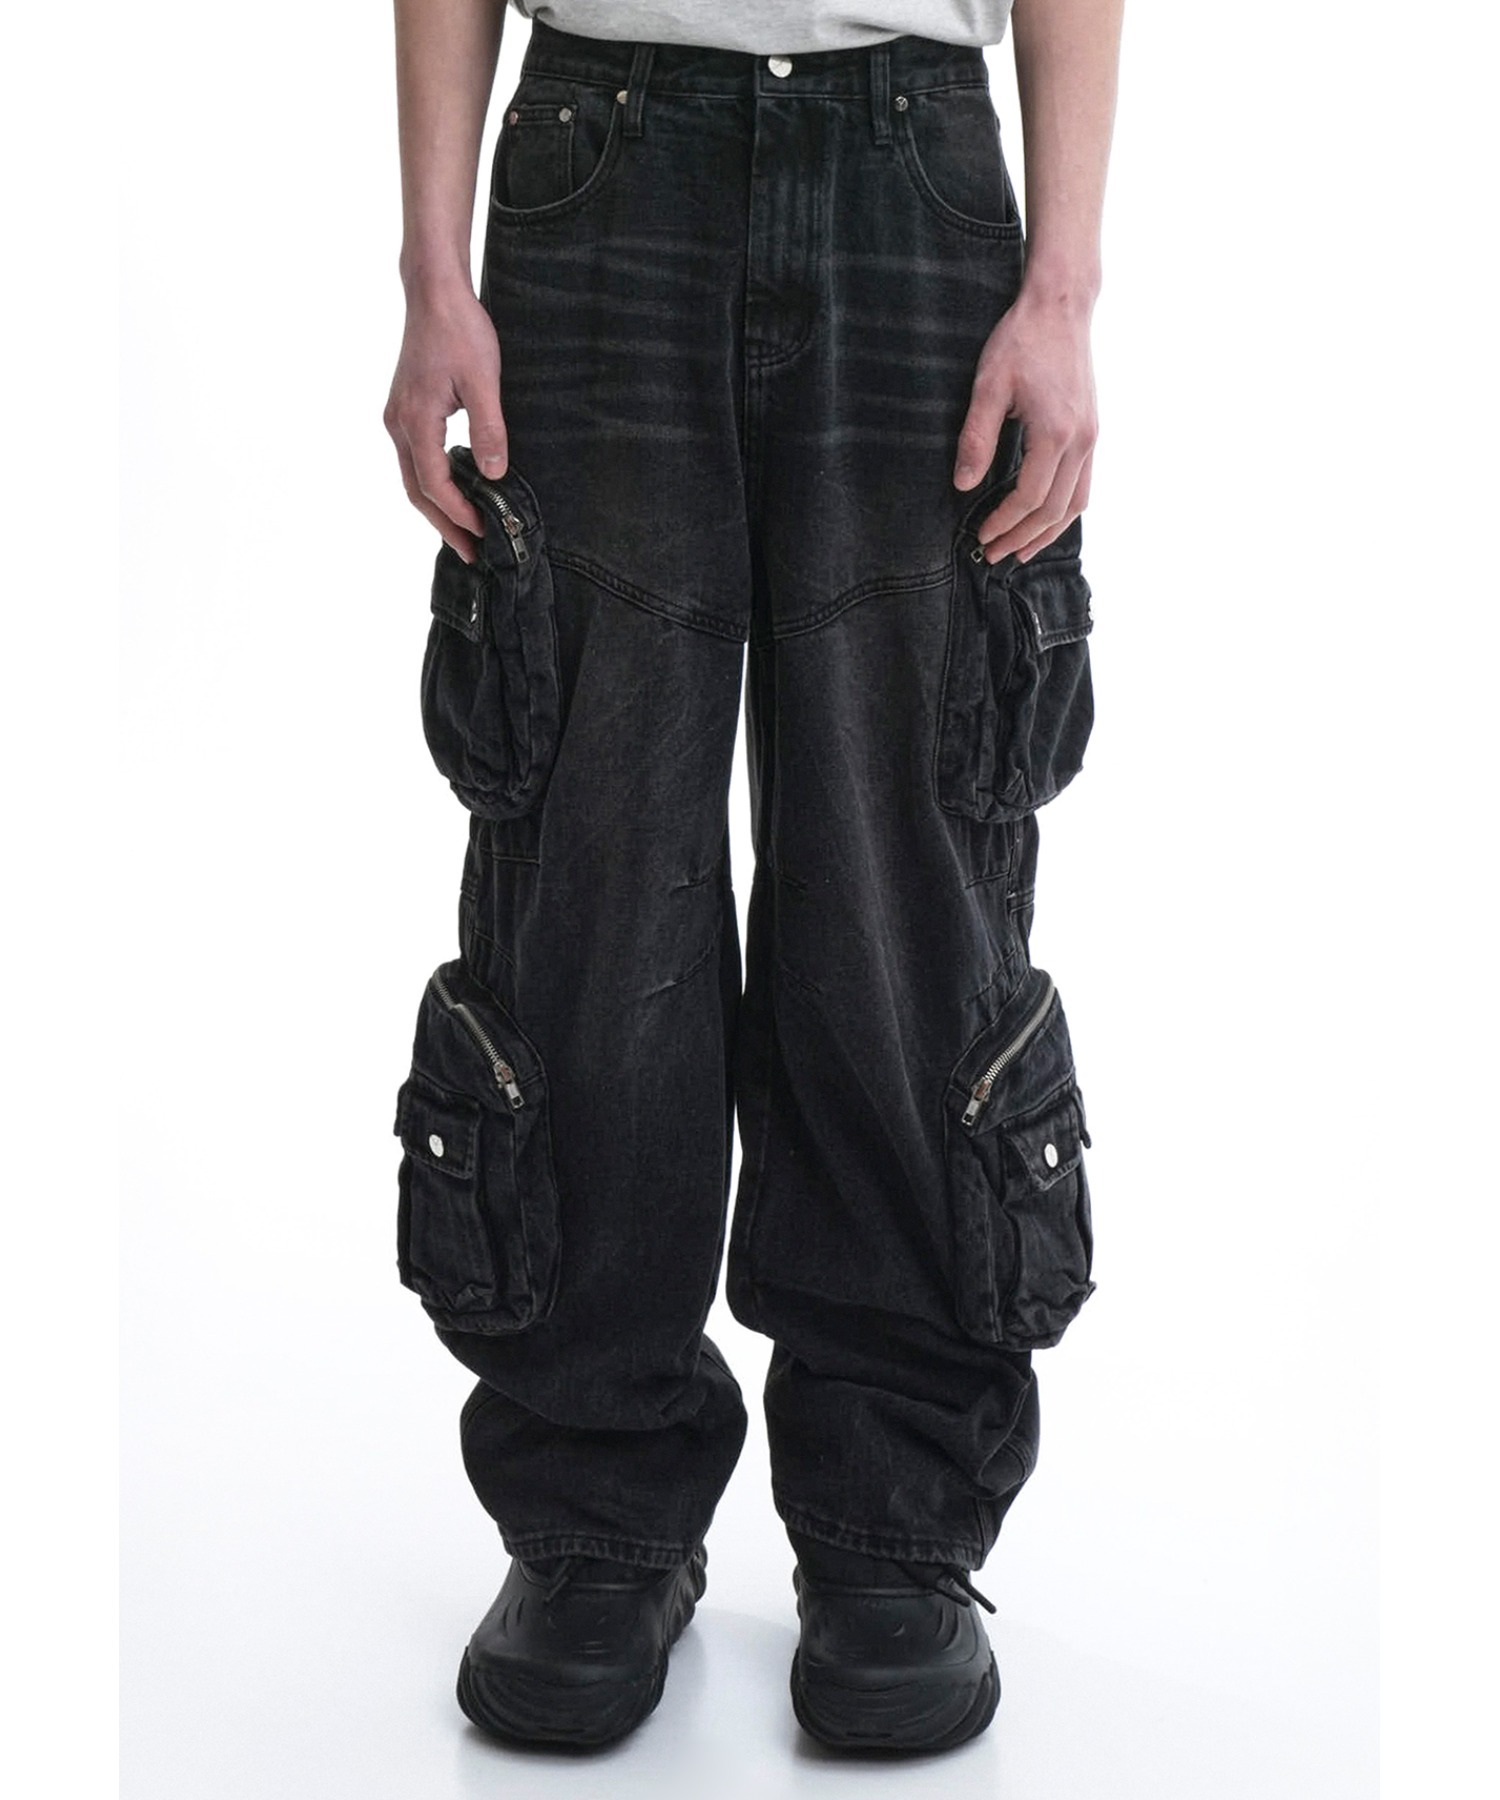 OY/オーワイ』 FOURTEEN CARGO POCKETS WASHED JEANS/4カーゴポケット ...